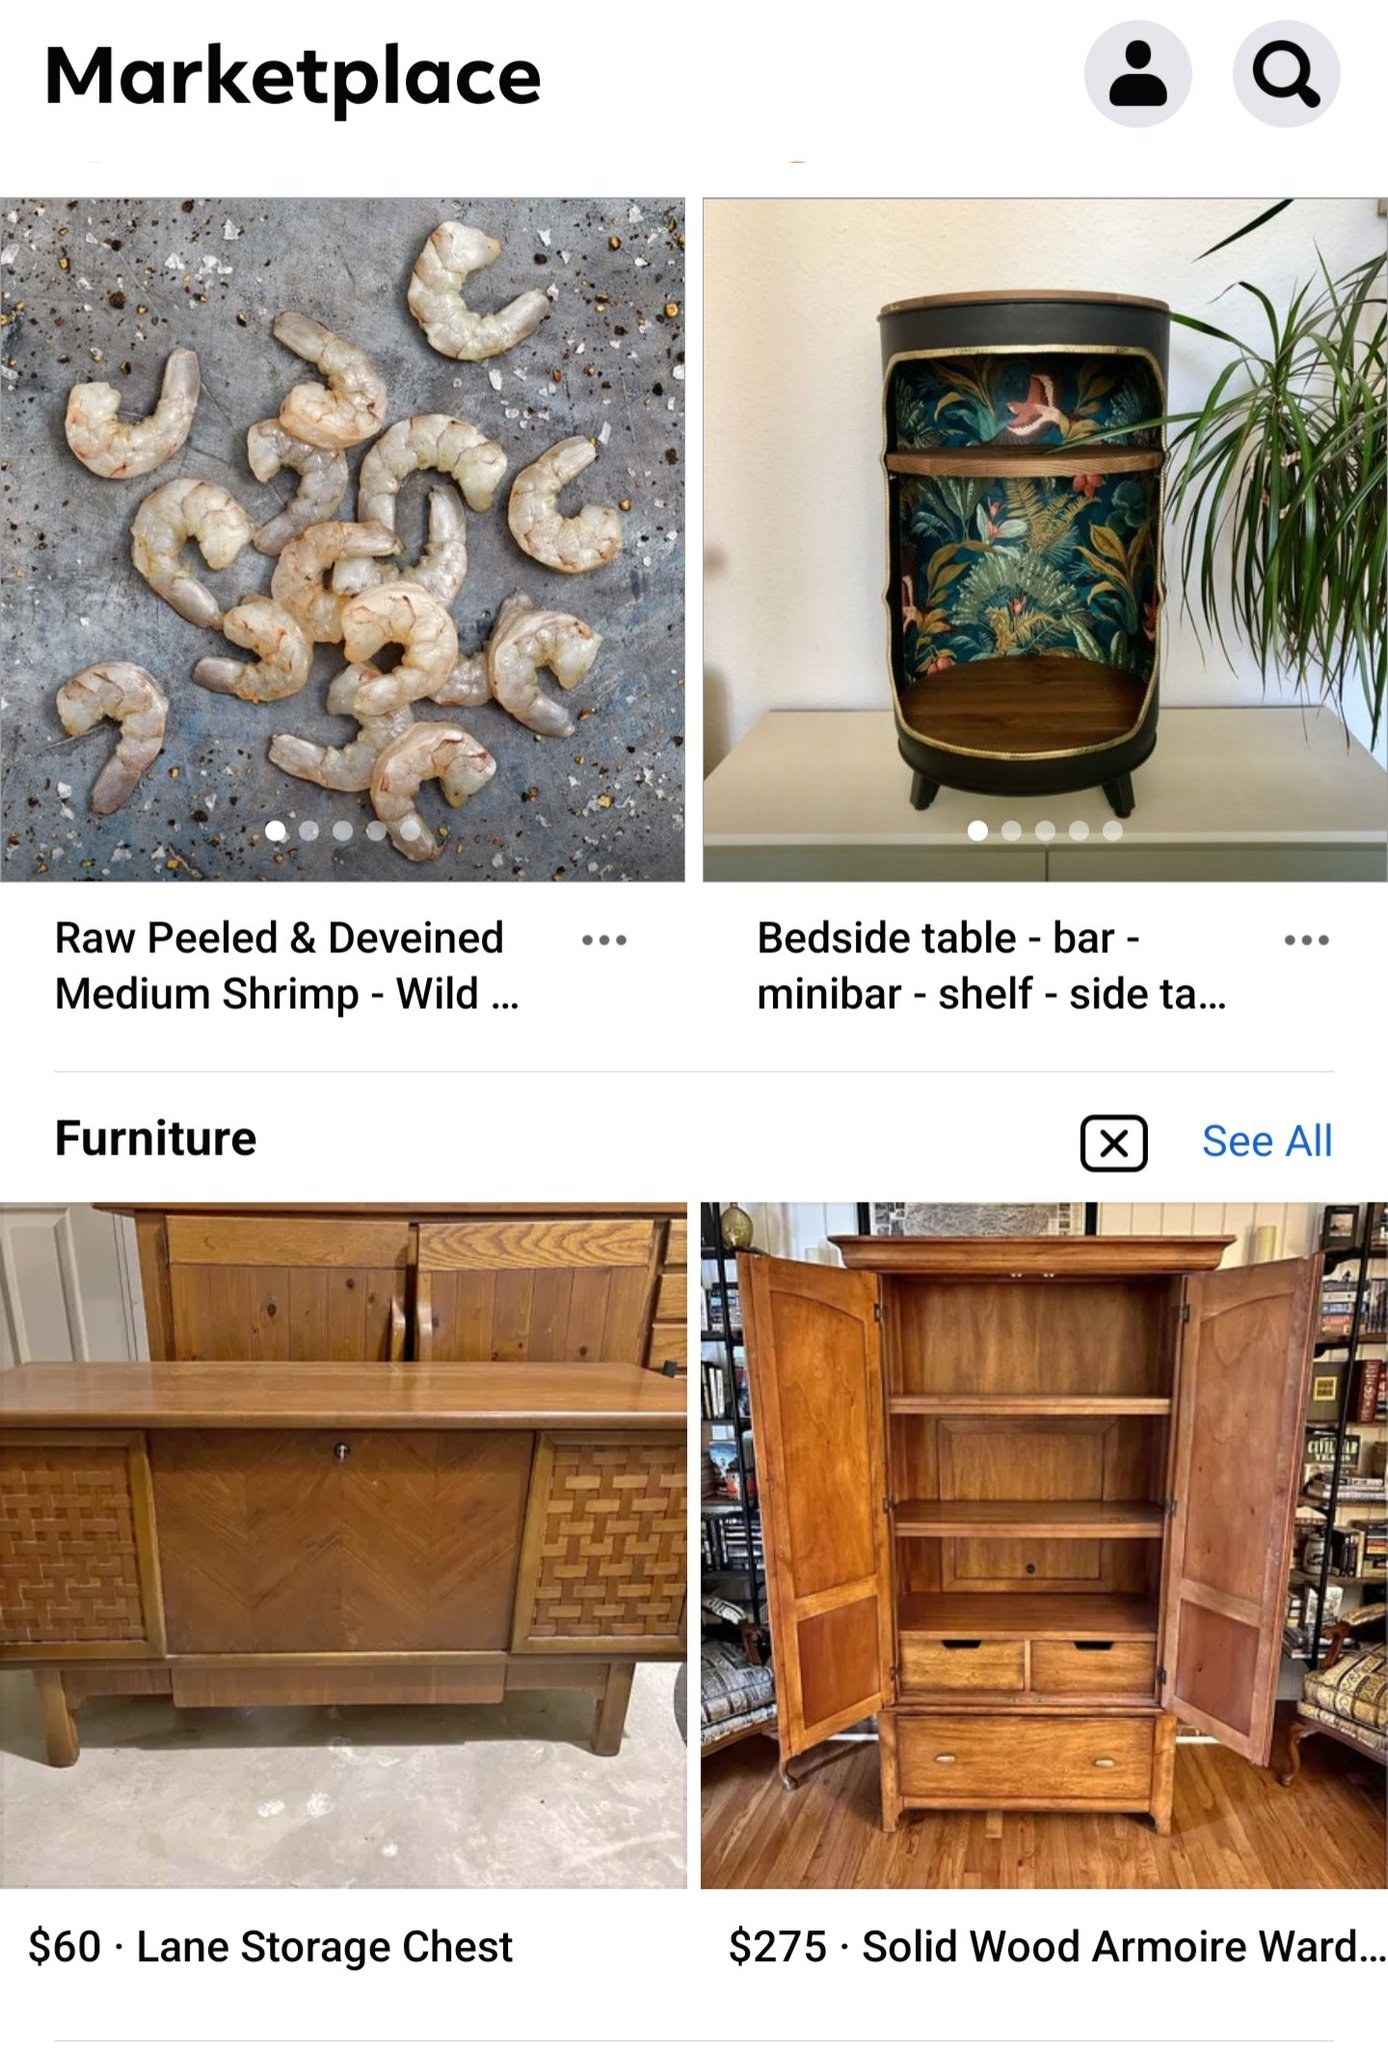 Raw peeled and deveined shrimp on the floor for sale, alongside wooden armoires and storage chests and a bedside bar